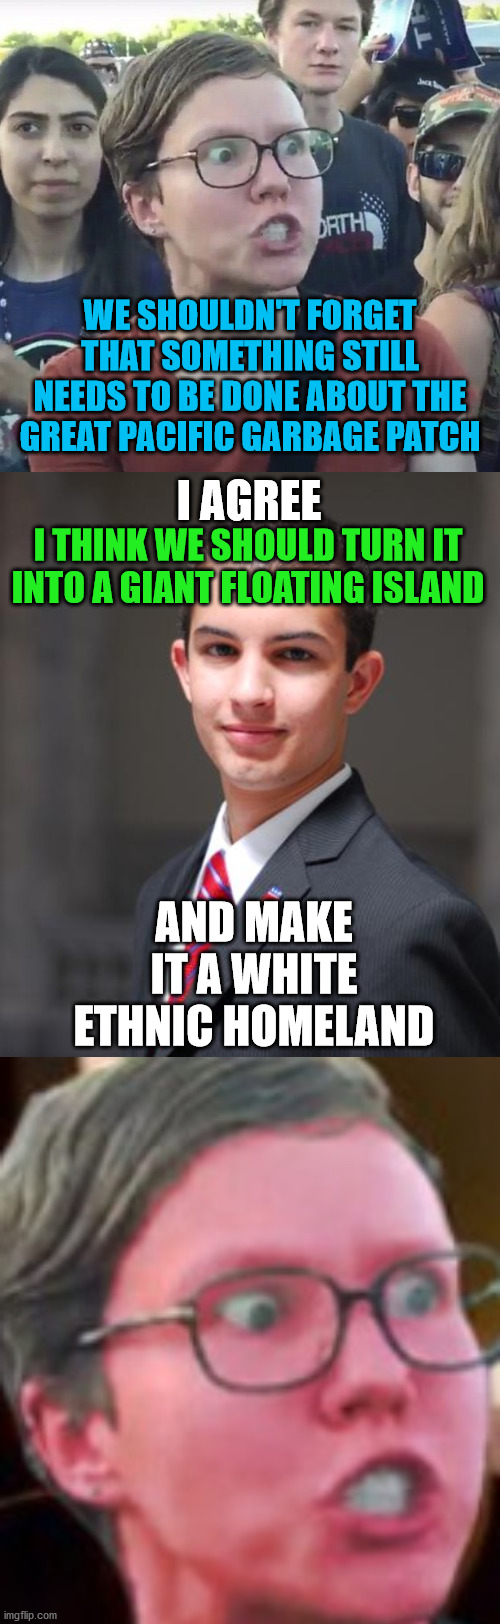 WE SHOULDN'T FORGET THAT SOMETHING STILL NEEDS TO BE DONE ABOUT THE GREAT PACIFIC GARBAGE PATCH; I AGREE; I THINK WE SHOULD TURN IT INTO A GIANT FLOATING ISLAND; AND MAKE IT A WHITE ETHNIC HOMELAND | image tagged in college conservative,triggered feminist,garbage,white,pacific,island | made w/ Imgflip meme maker